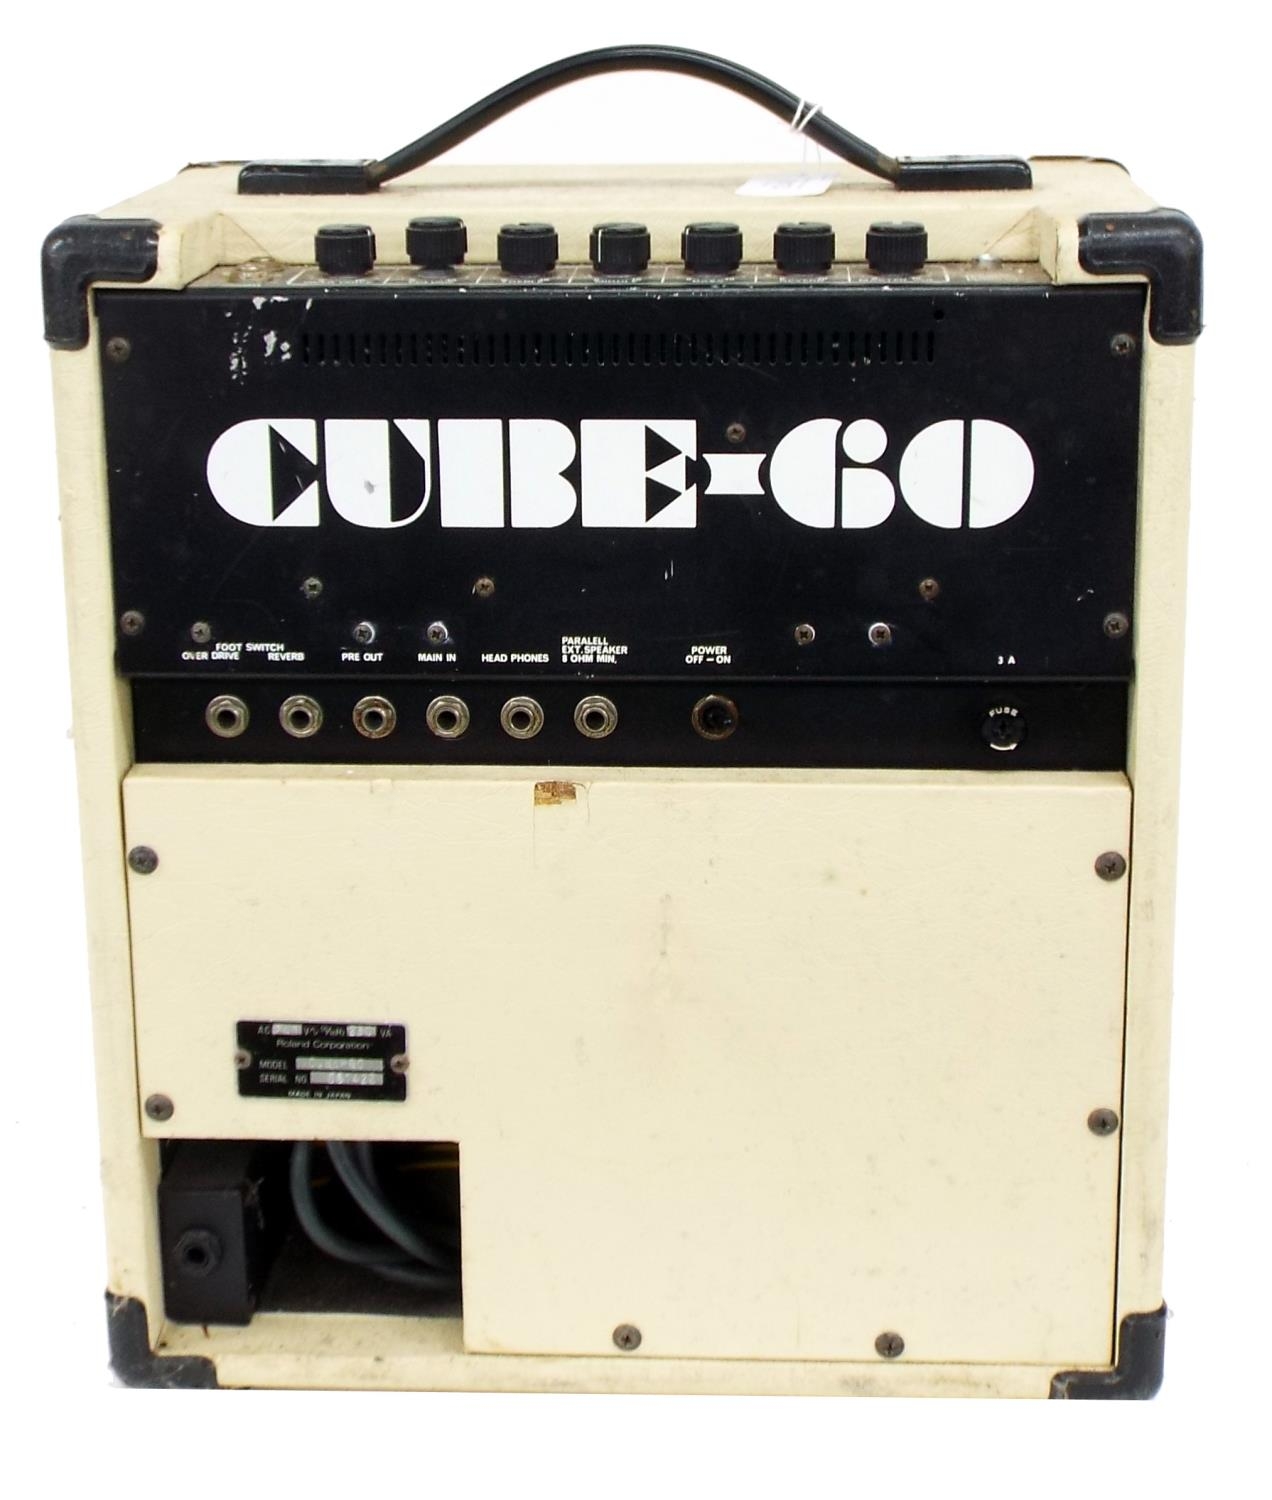 Roland Cube-60 guitar amplifier, made in Japan, ser. no. 081422 - Image 2 of 2